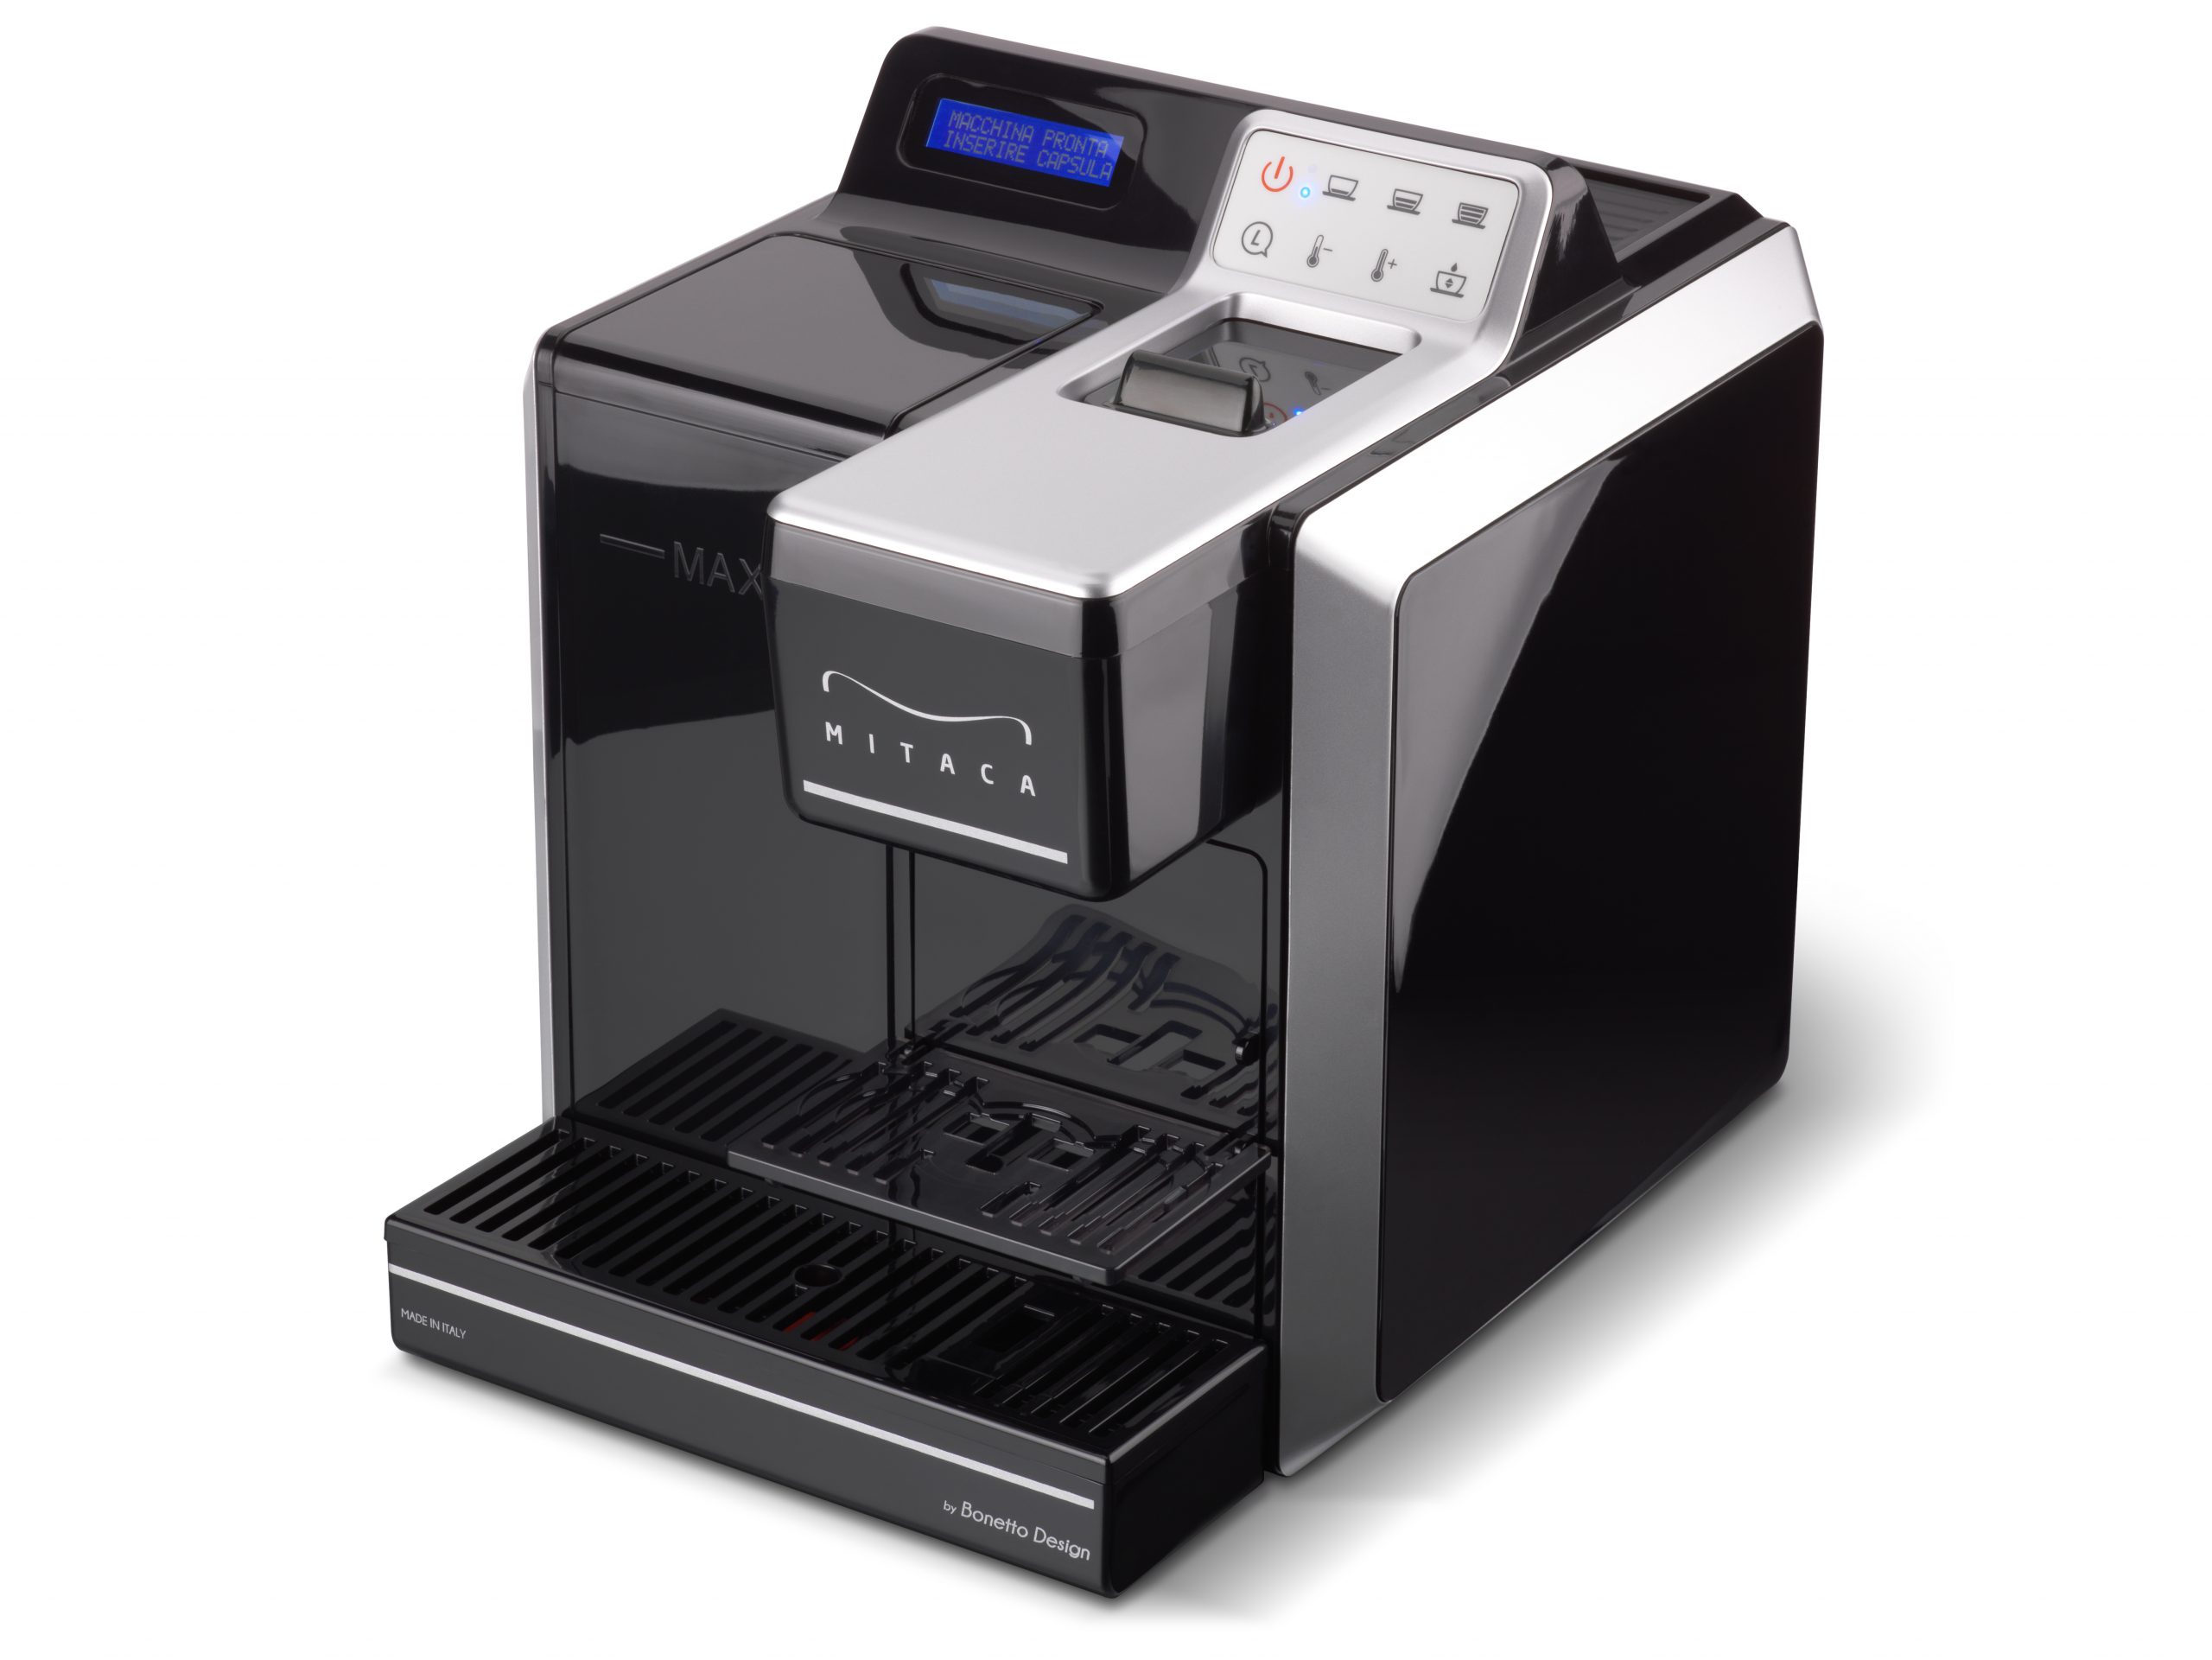 illy mitaca m5 MPS | KoffiePartners